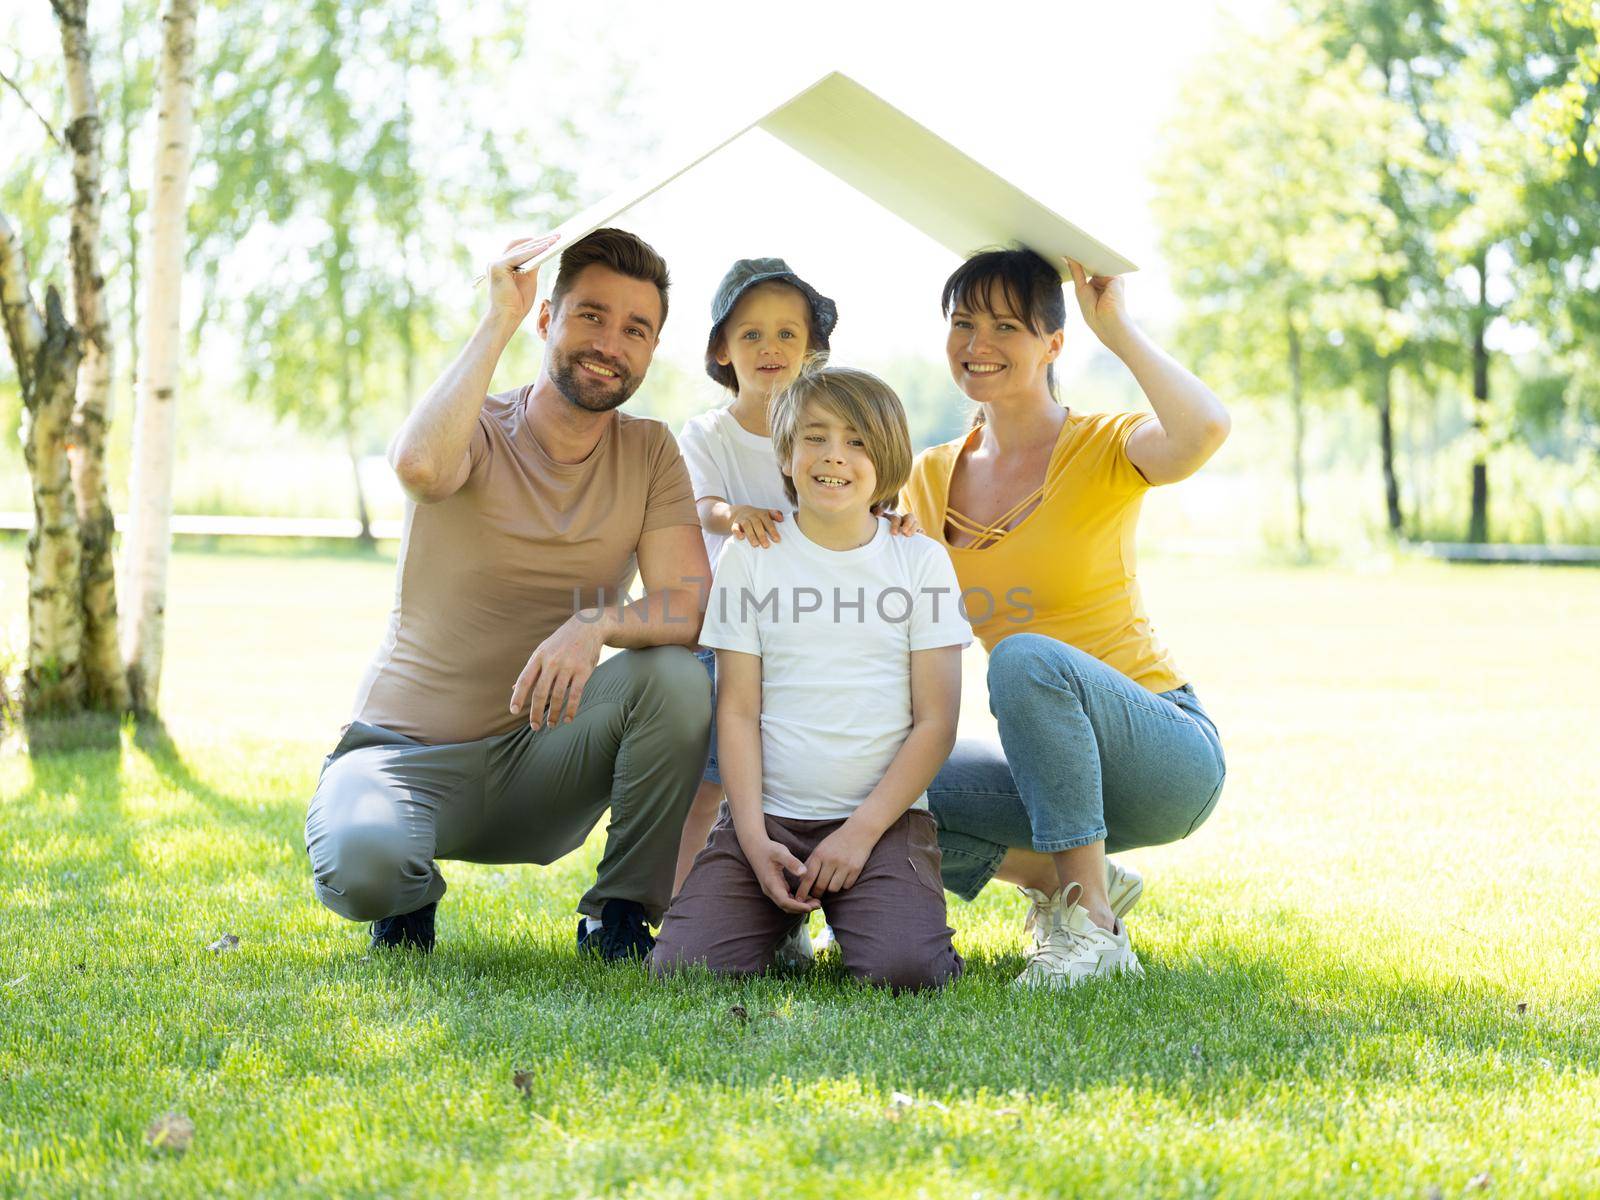 Concept of mortgage and housing for young families. Mother father and two children sitting on grass and holding roof symbol